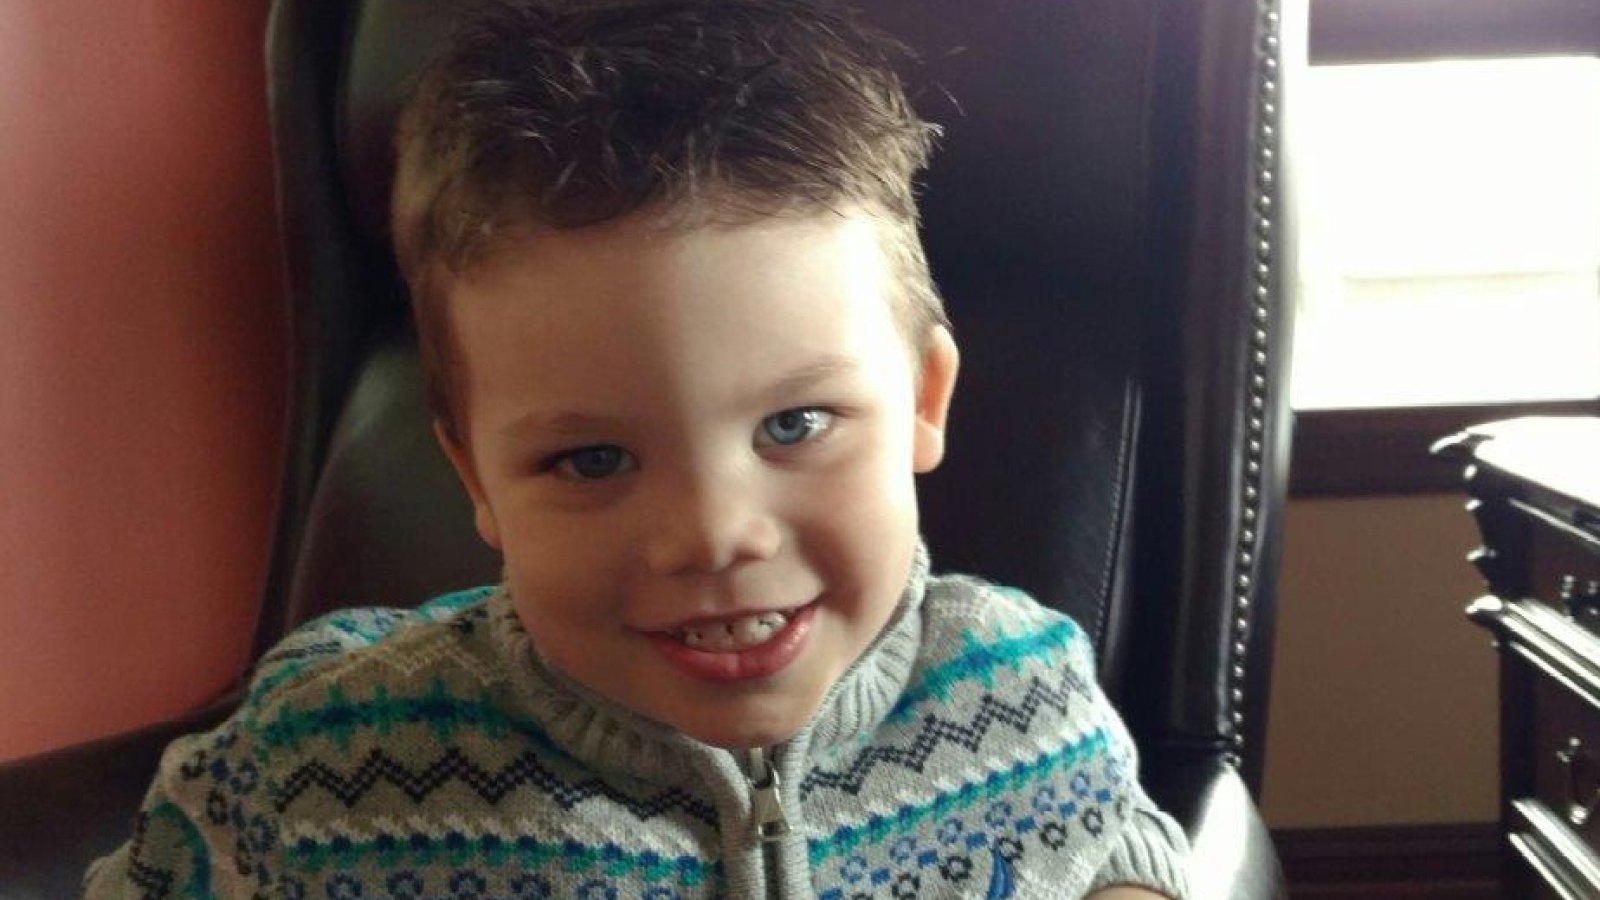 Lane Graves, 2, was snatched by an alligator at Disney World on Tuesday, June 14.